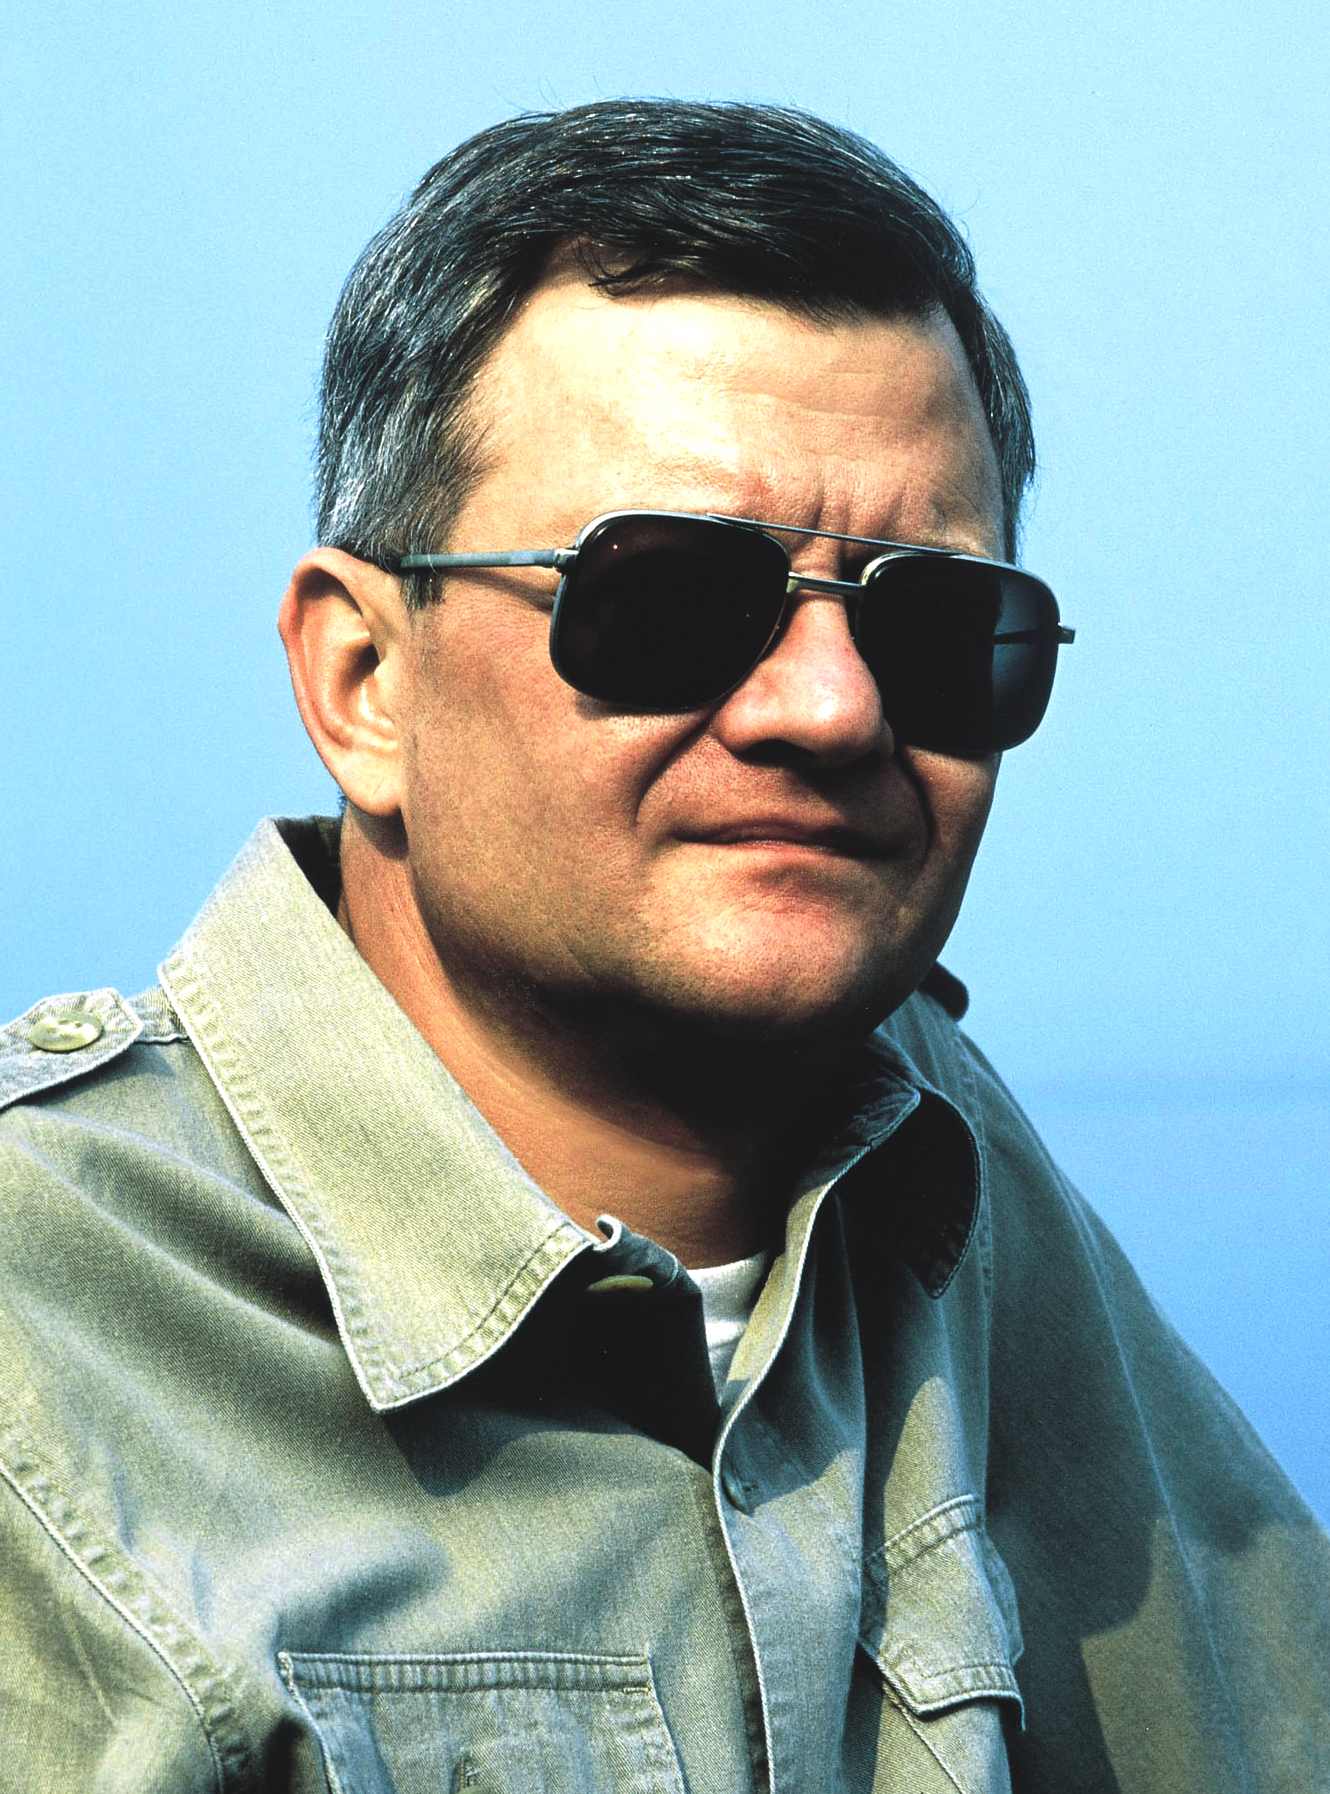 Tom Clancy, writer of many great books made into films